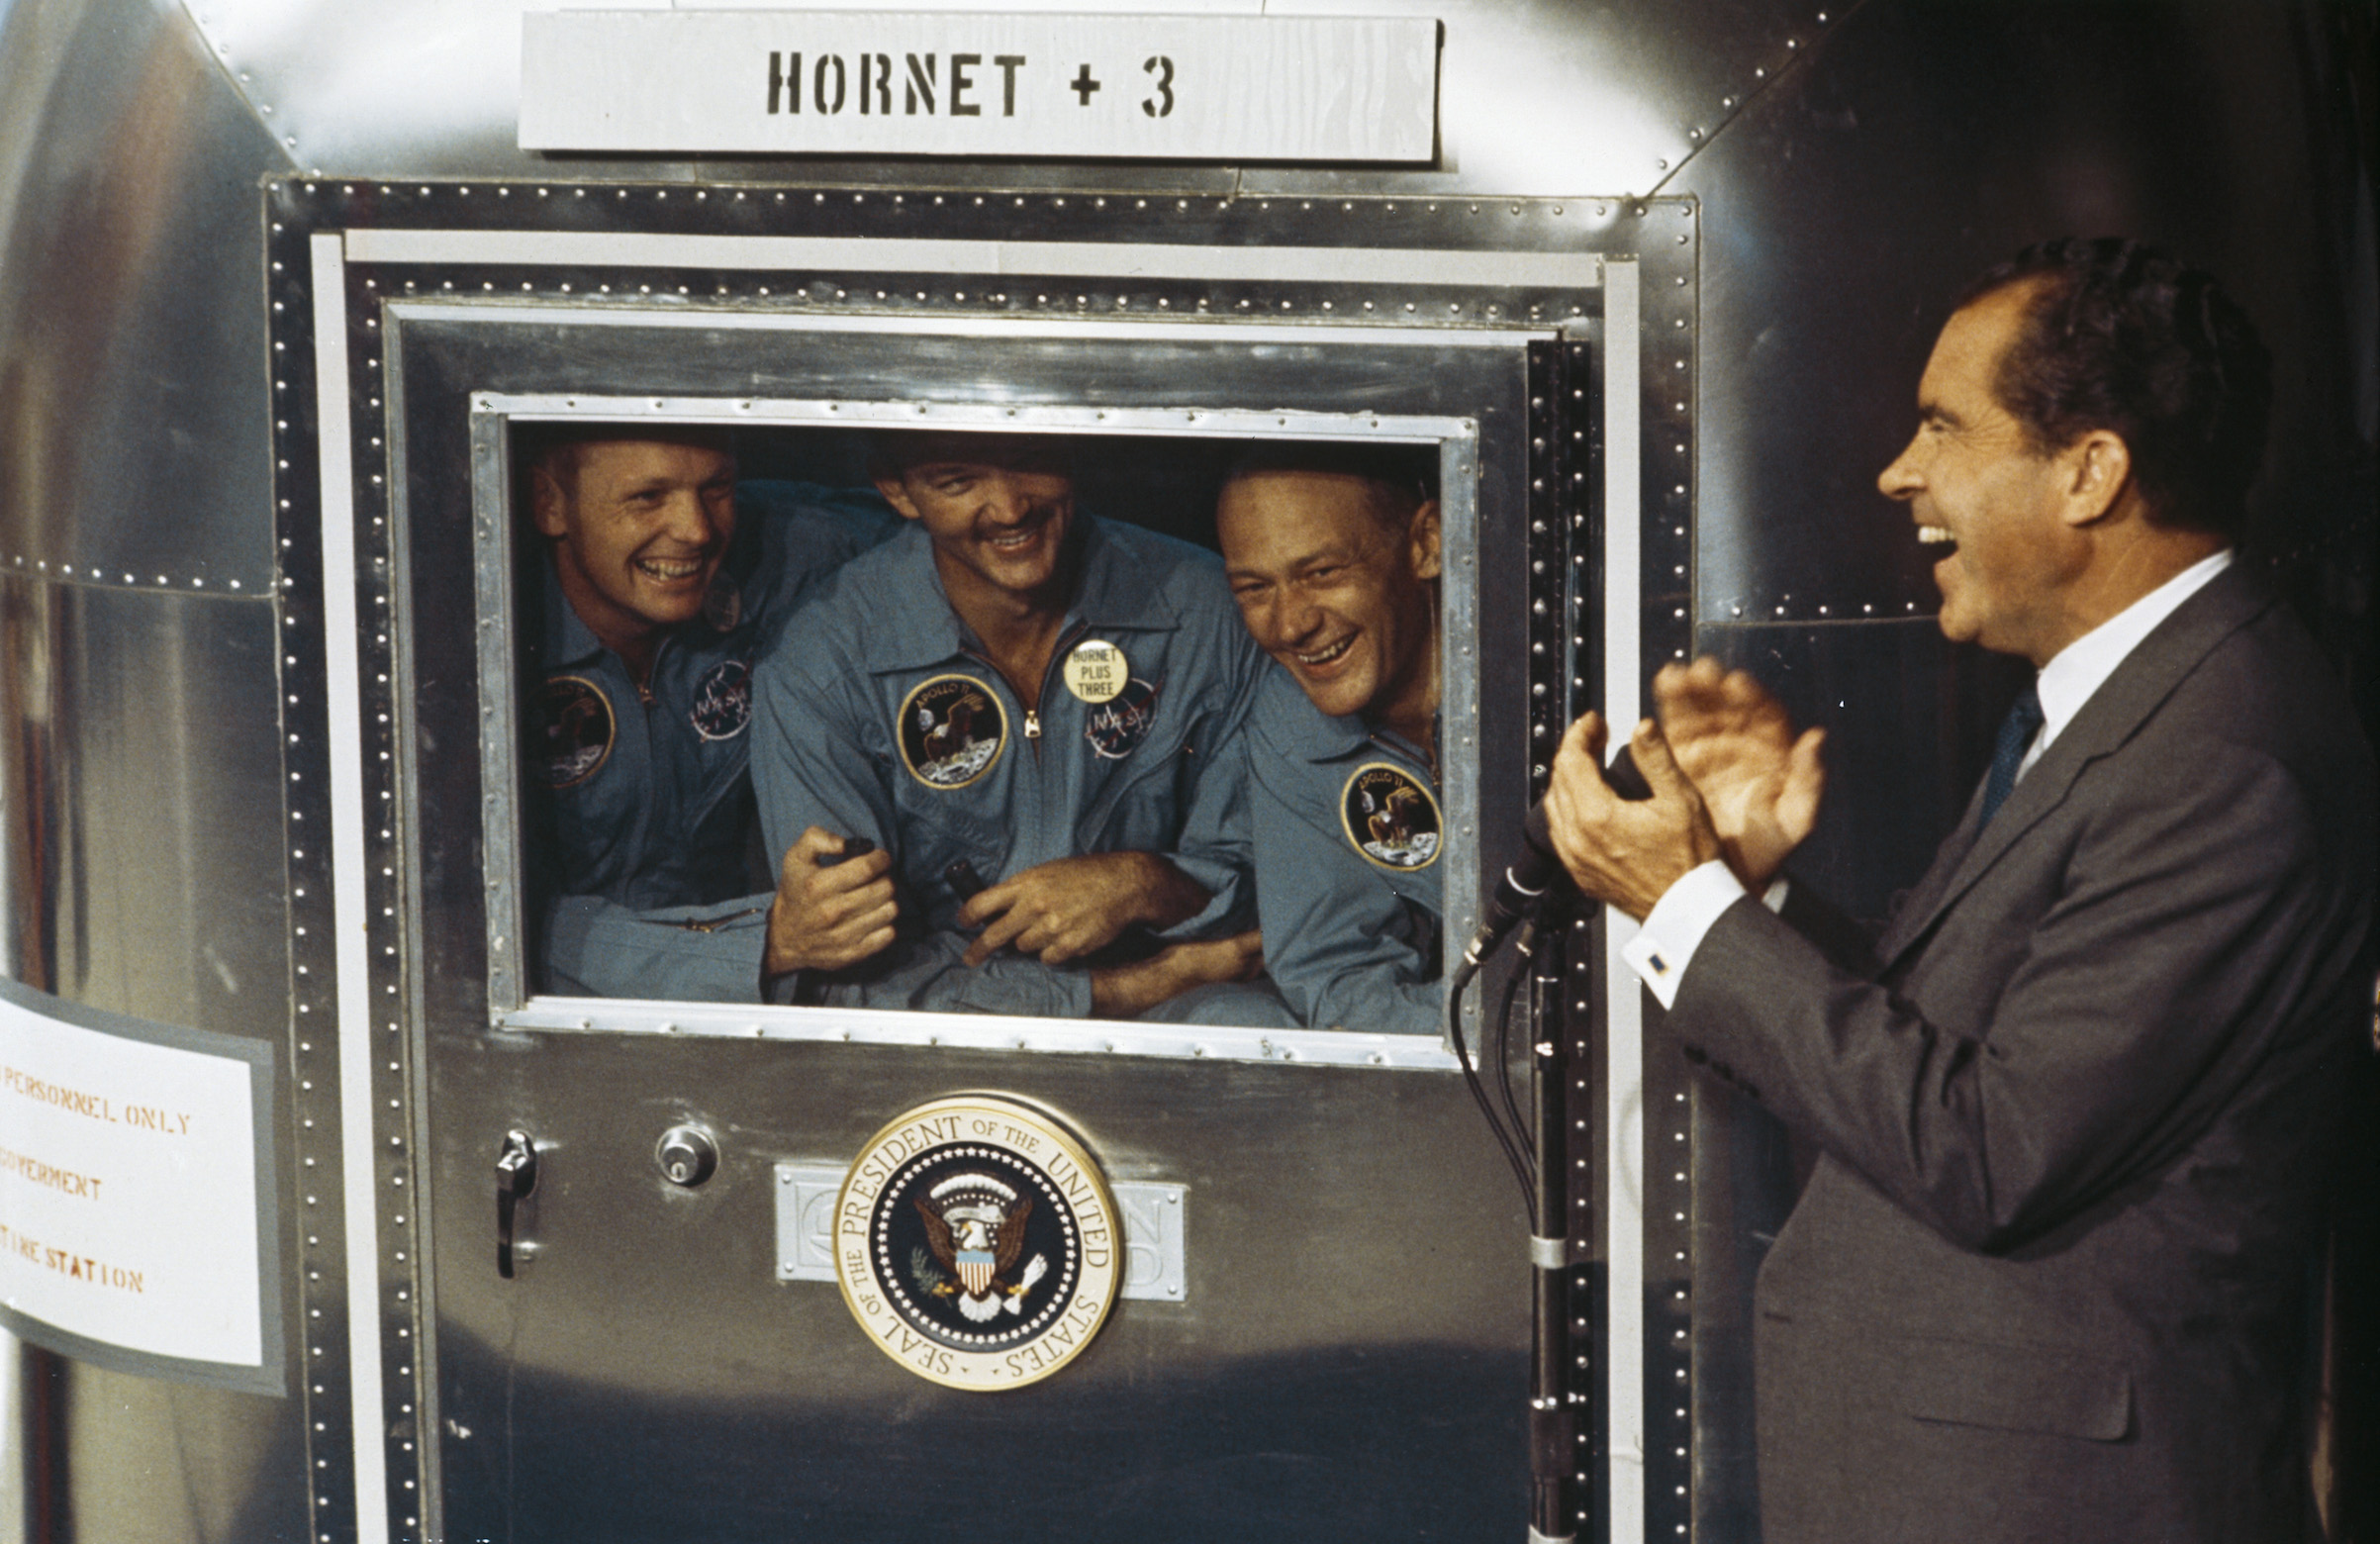 From left to right, Neil Armstrong, Michael Collins and Buzz Aldrin, the crew of the historic Apollo 11 moon landing mission, are subjected to a period of quarantine upon their return to earth. Through the window of their Mobile Quarantine Facility, they hold a conversation with President Richard Nixon. (MPI/Getty Images)